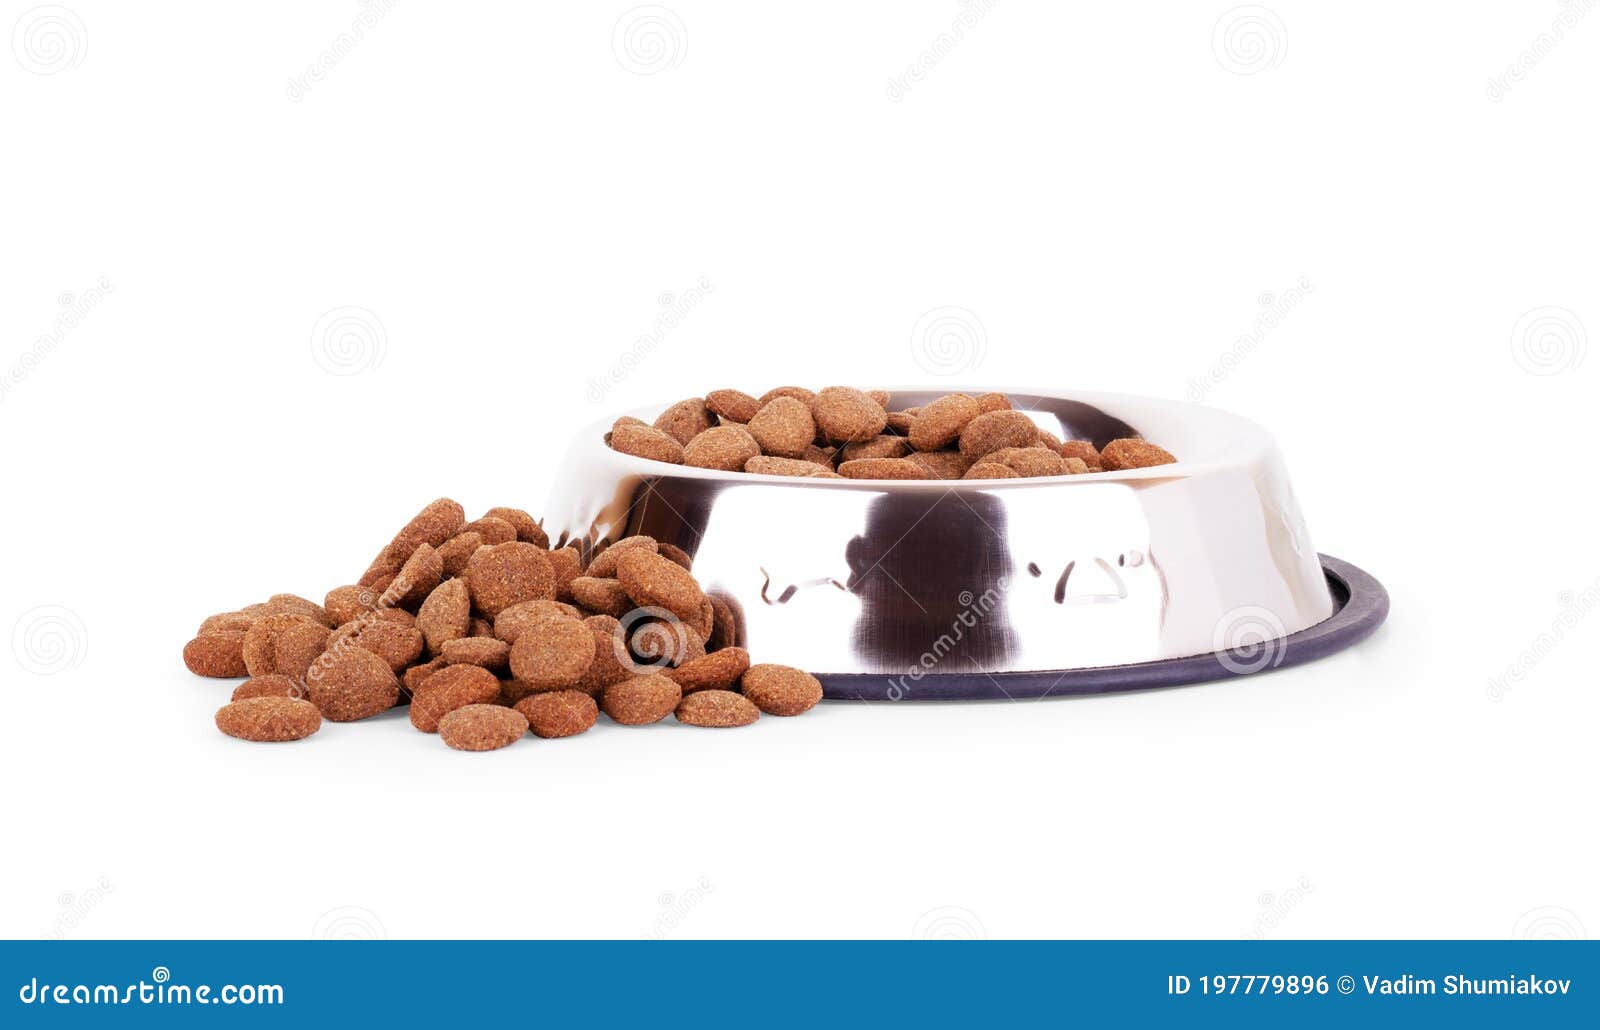 dog food in bowl,  on white